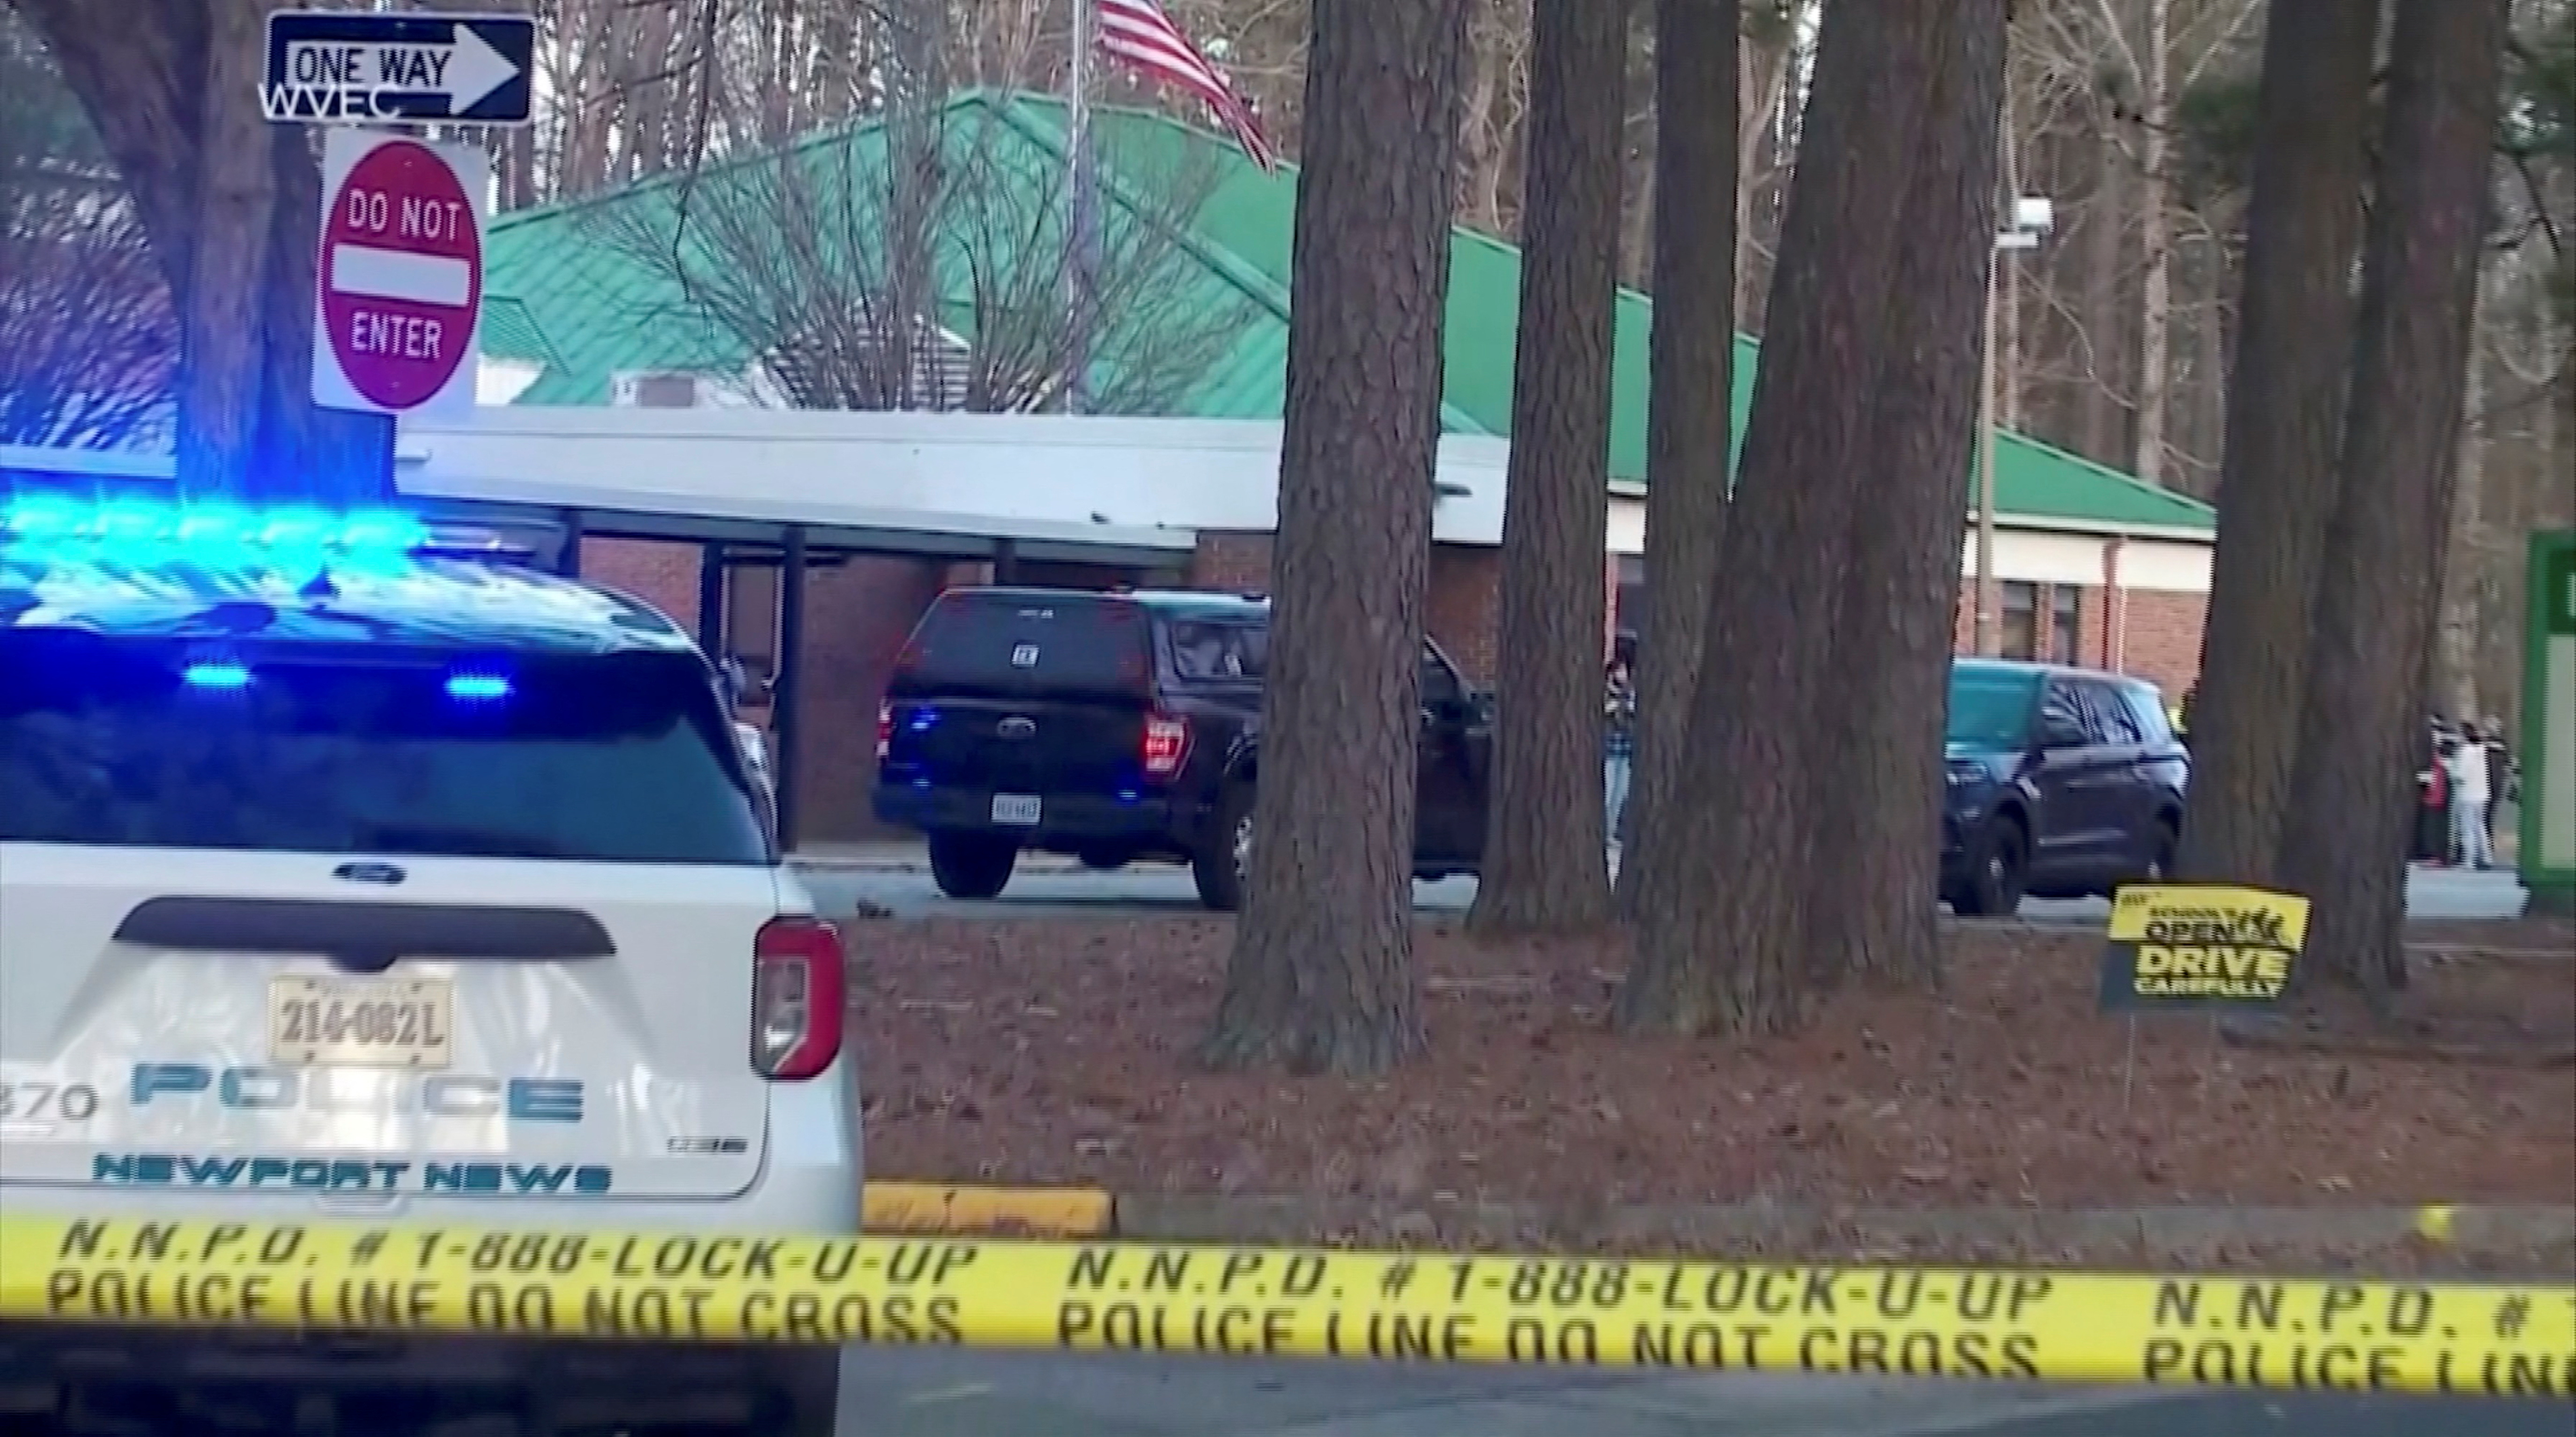 Police vehicles are seen parked outside Richneck Elementary School, where according to the police, a six-year-old boy shot and wounded a teacher, in Newport News, Virginia, U.S., January 6, 2023, in this screen grab from a handout video. WVEC via ABC/Handout via REUTERS THIS IMAGE HAS BEEN SUPPLIED BY A THIRD PARTY NEW ZEALAND OUT. NO COMMERCIAL OR EDITORIAL SALES IN NEW ZEALAND. UNITED STATES OUT. NO COMMERCIAL OR EDITORIAL SALES IN UNITED STATES. NO RESALES. NO ARCHIVES. MANDATORY CREDIT. DO NOT OBSCURE LOGO.